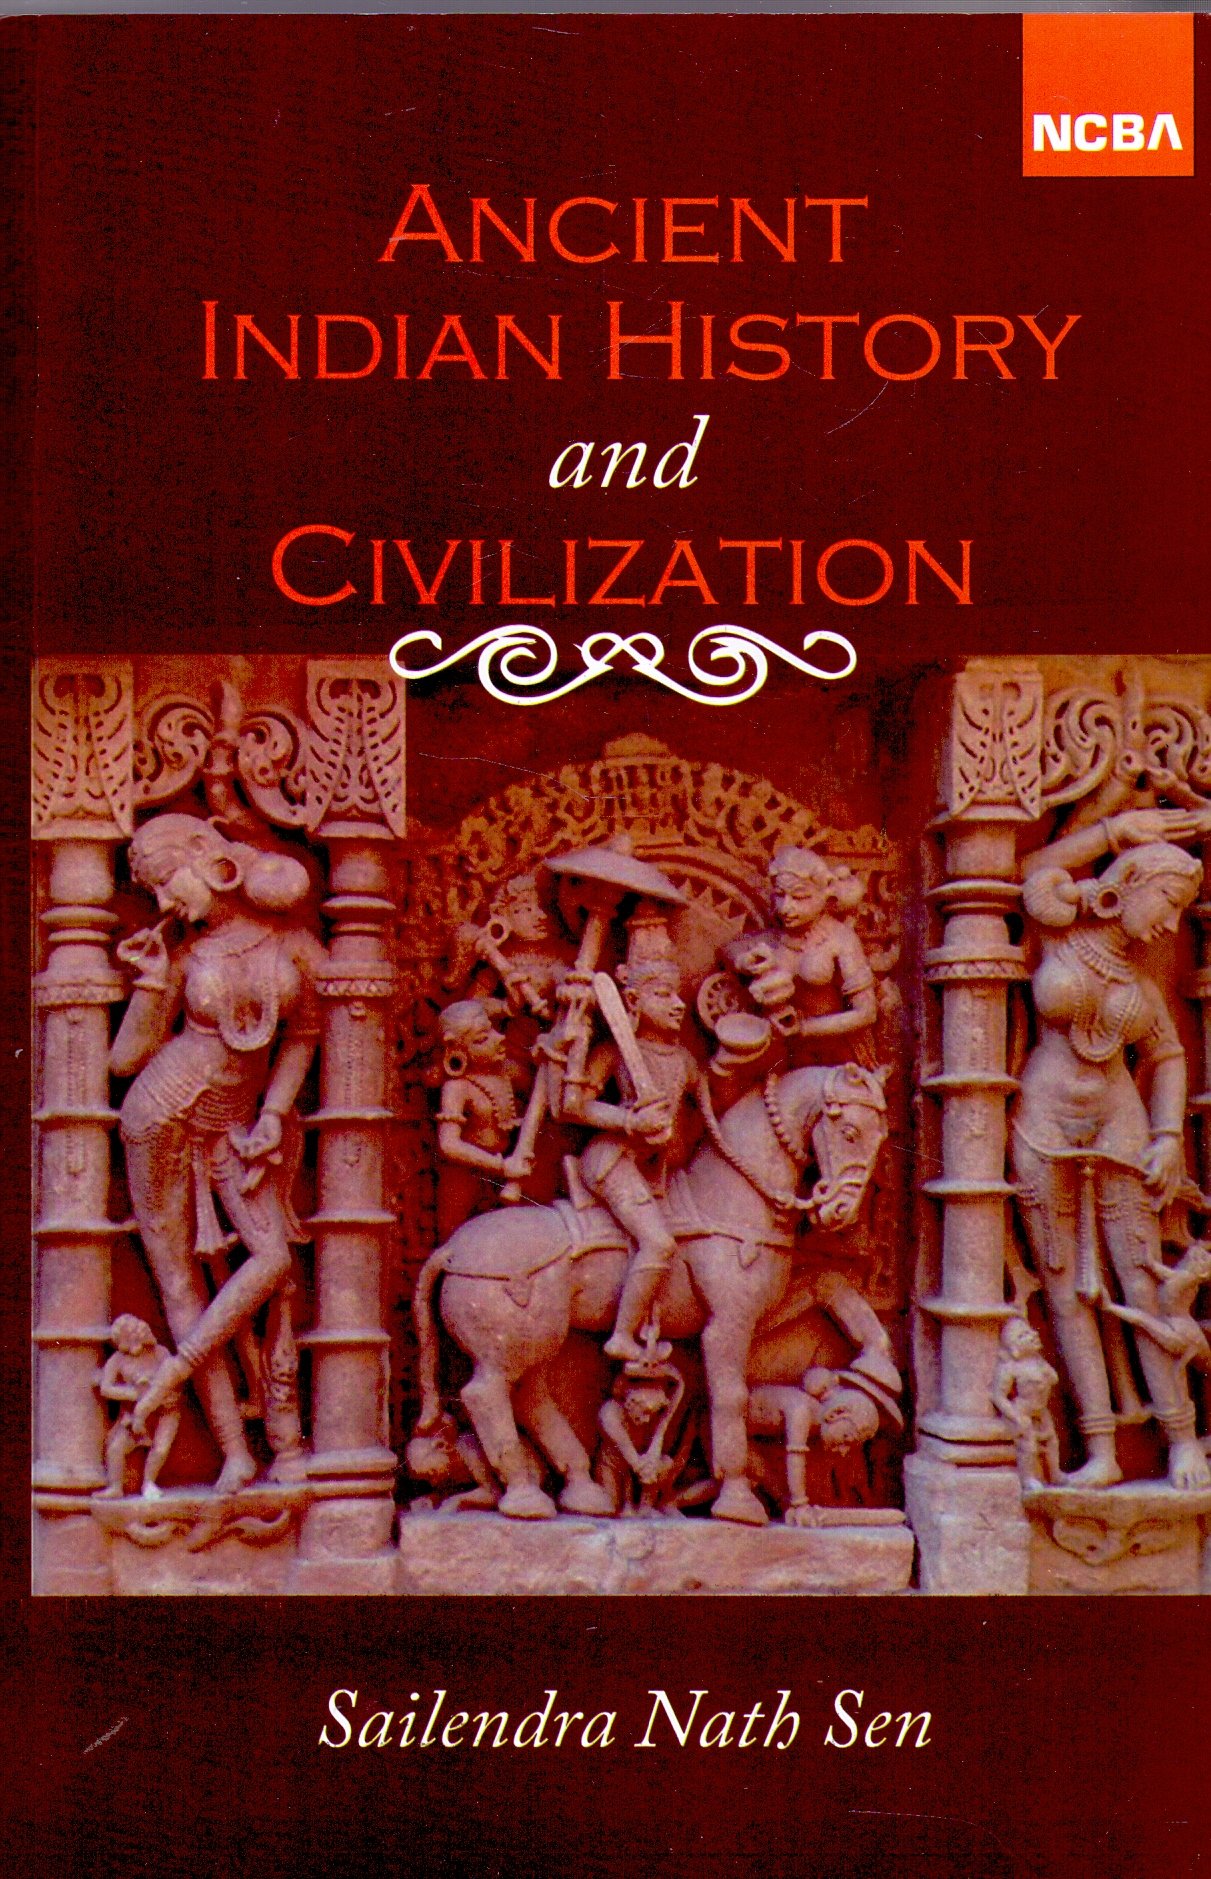 Ancient Indian History and Civilization